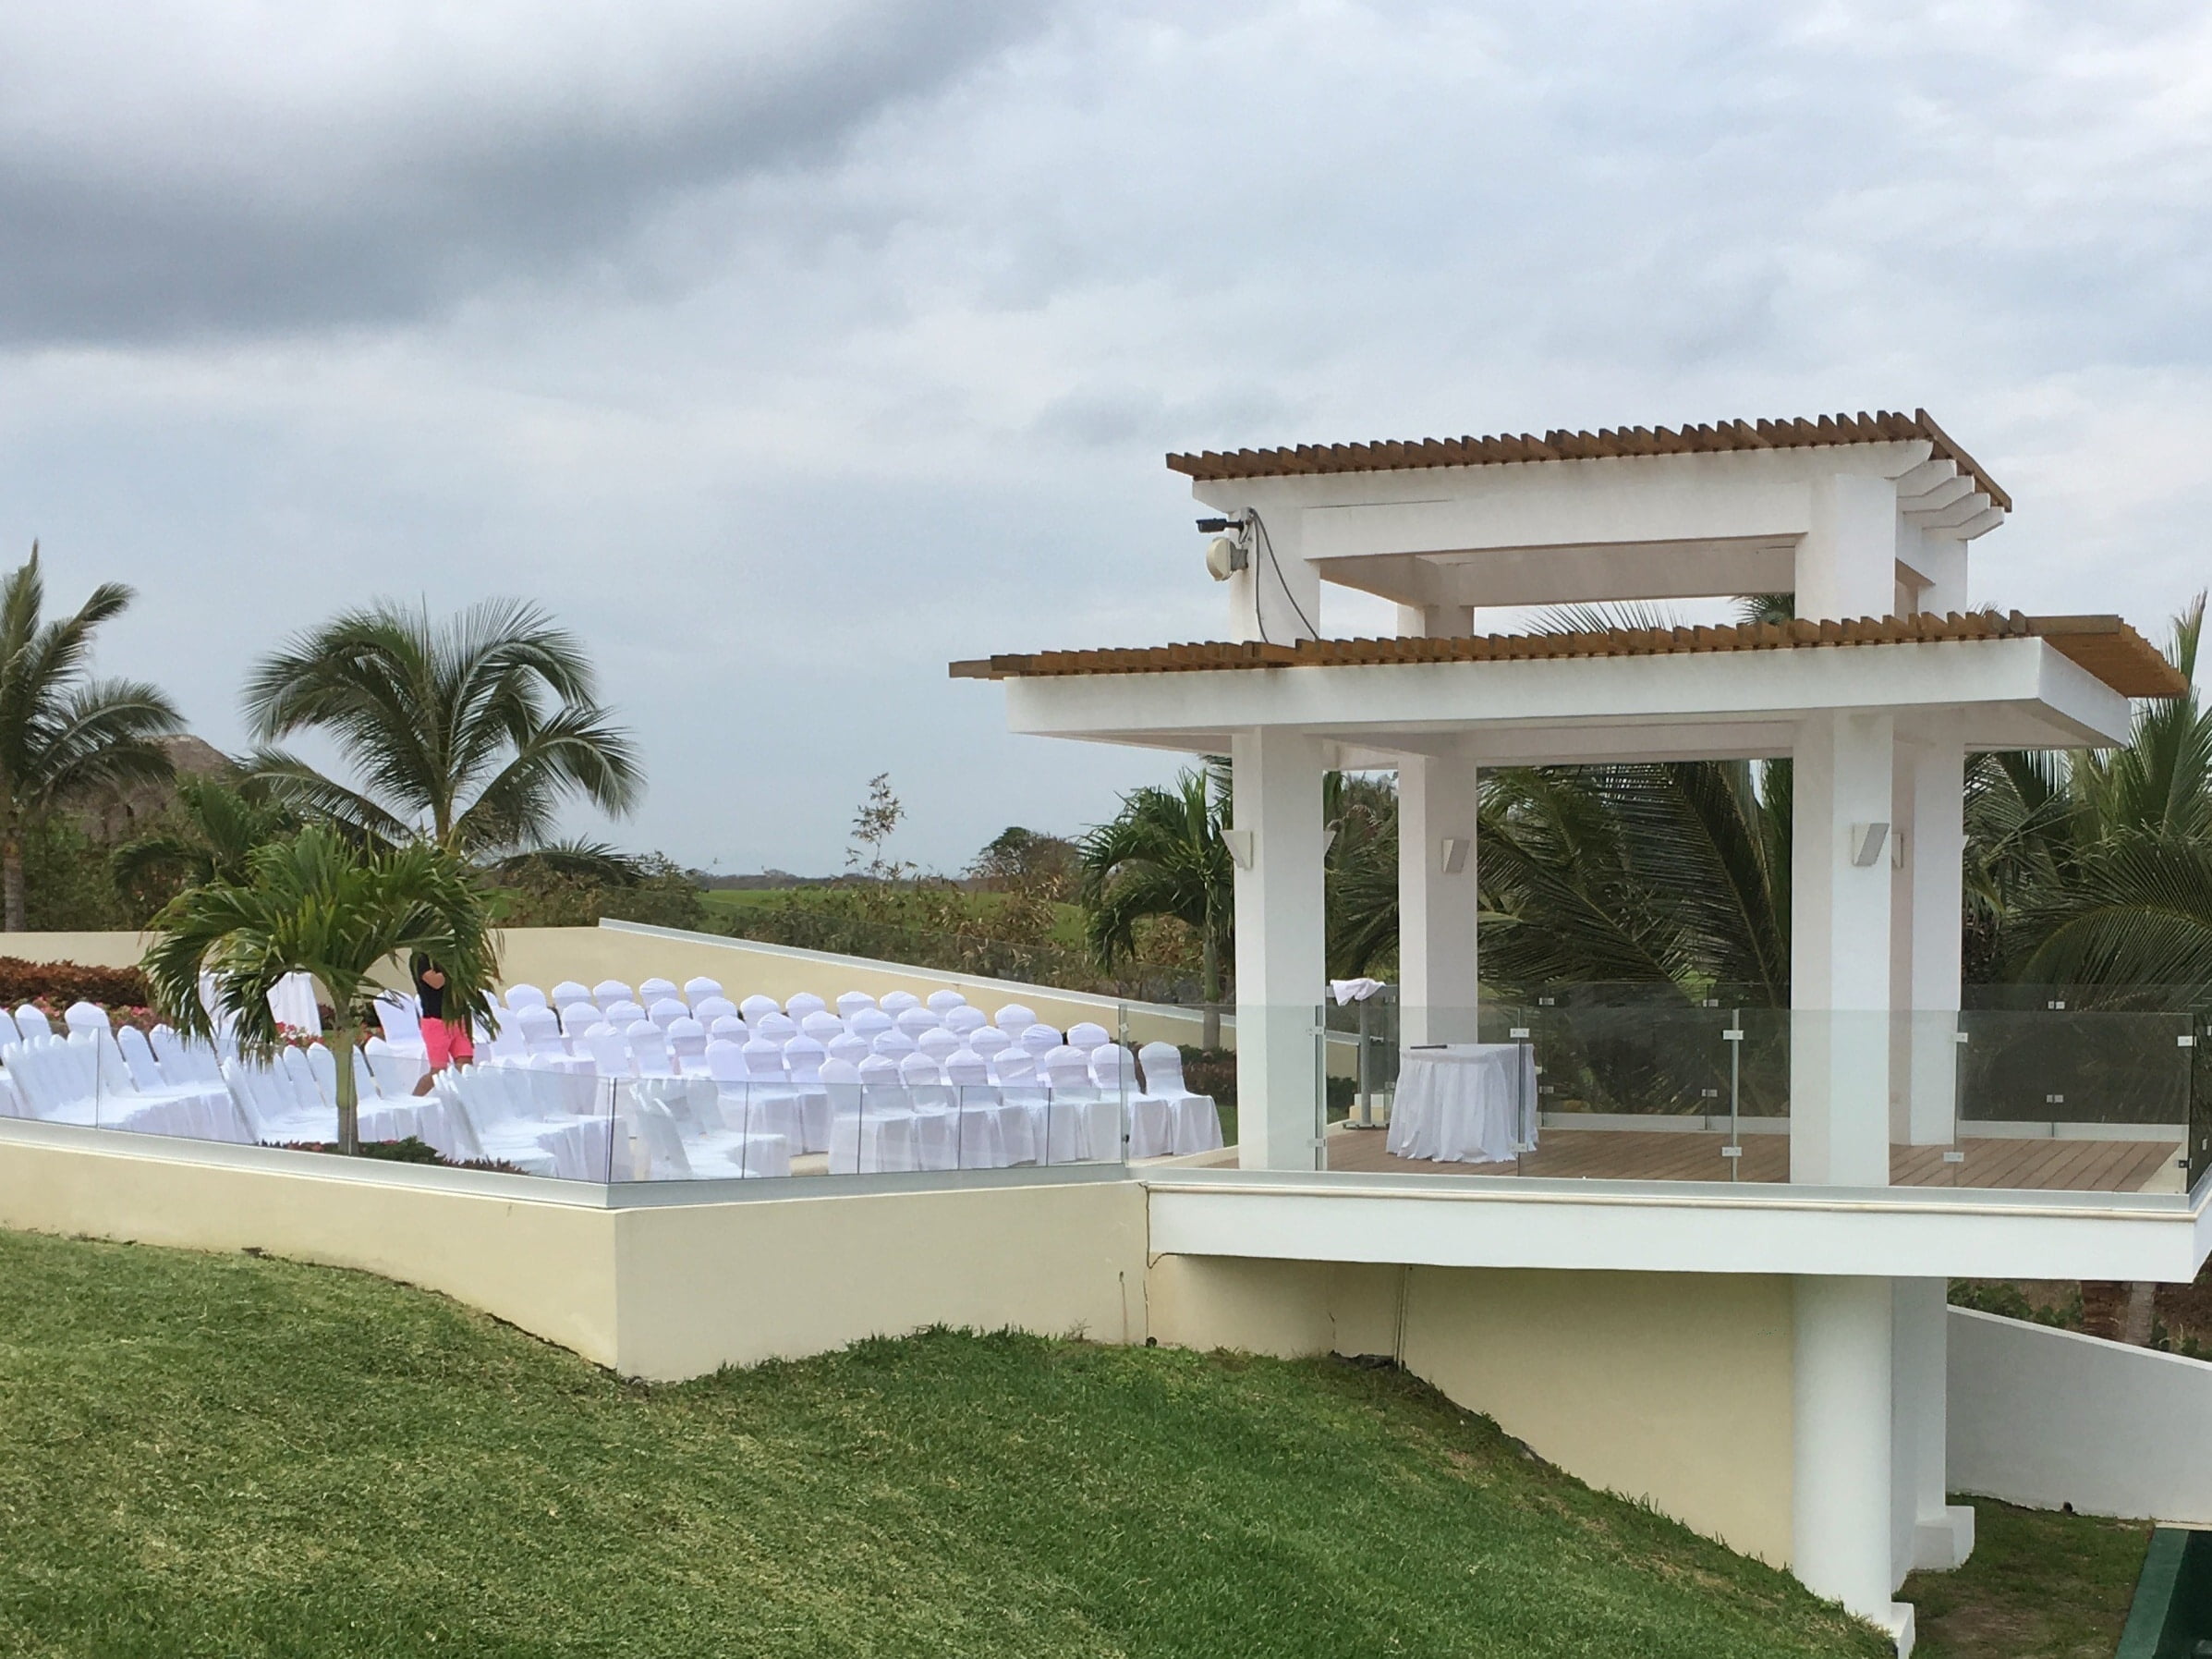 main wedding gazebo with chairs and tables set up for wedding ceremony by the lawn